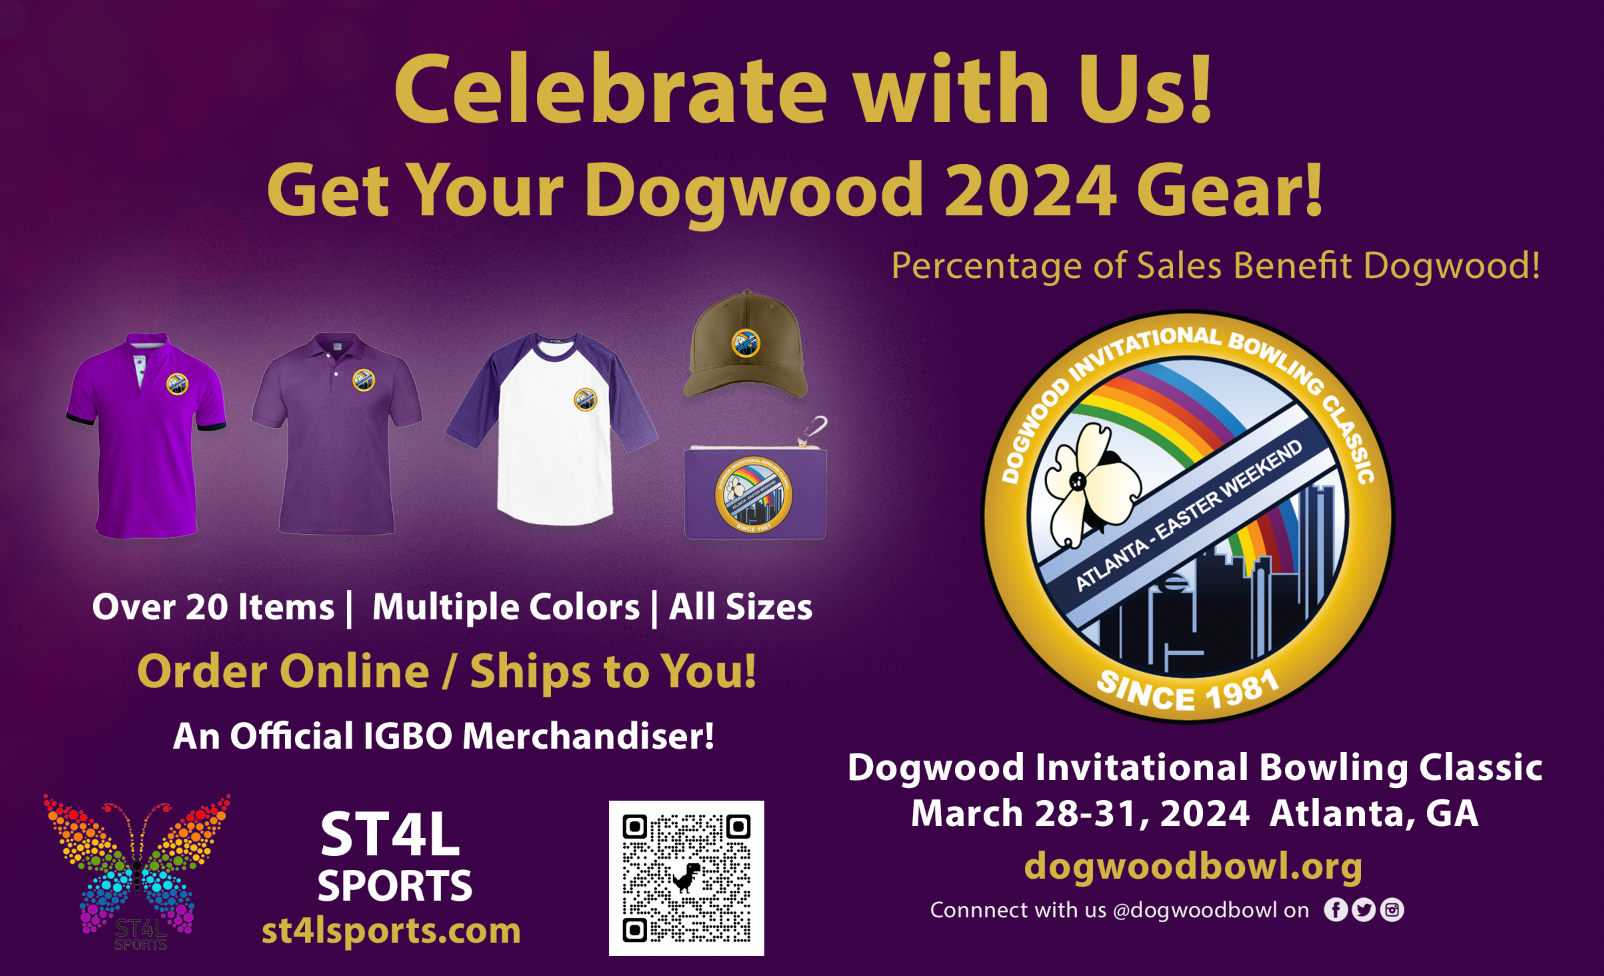 Show Your Colors with Official Dogwood 2024 Gear Dogwood Invitational